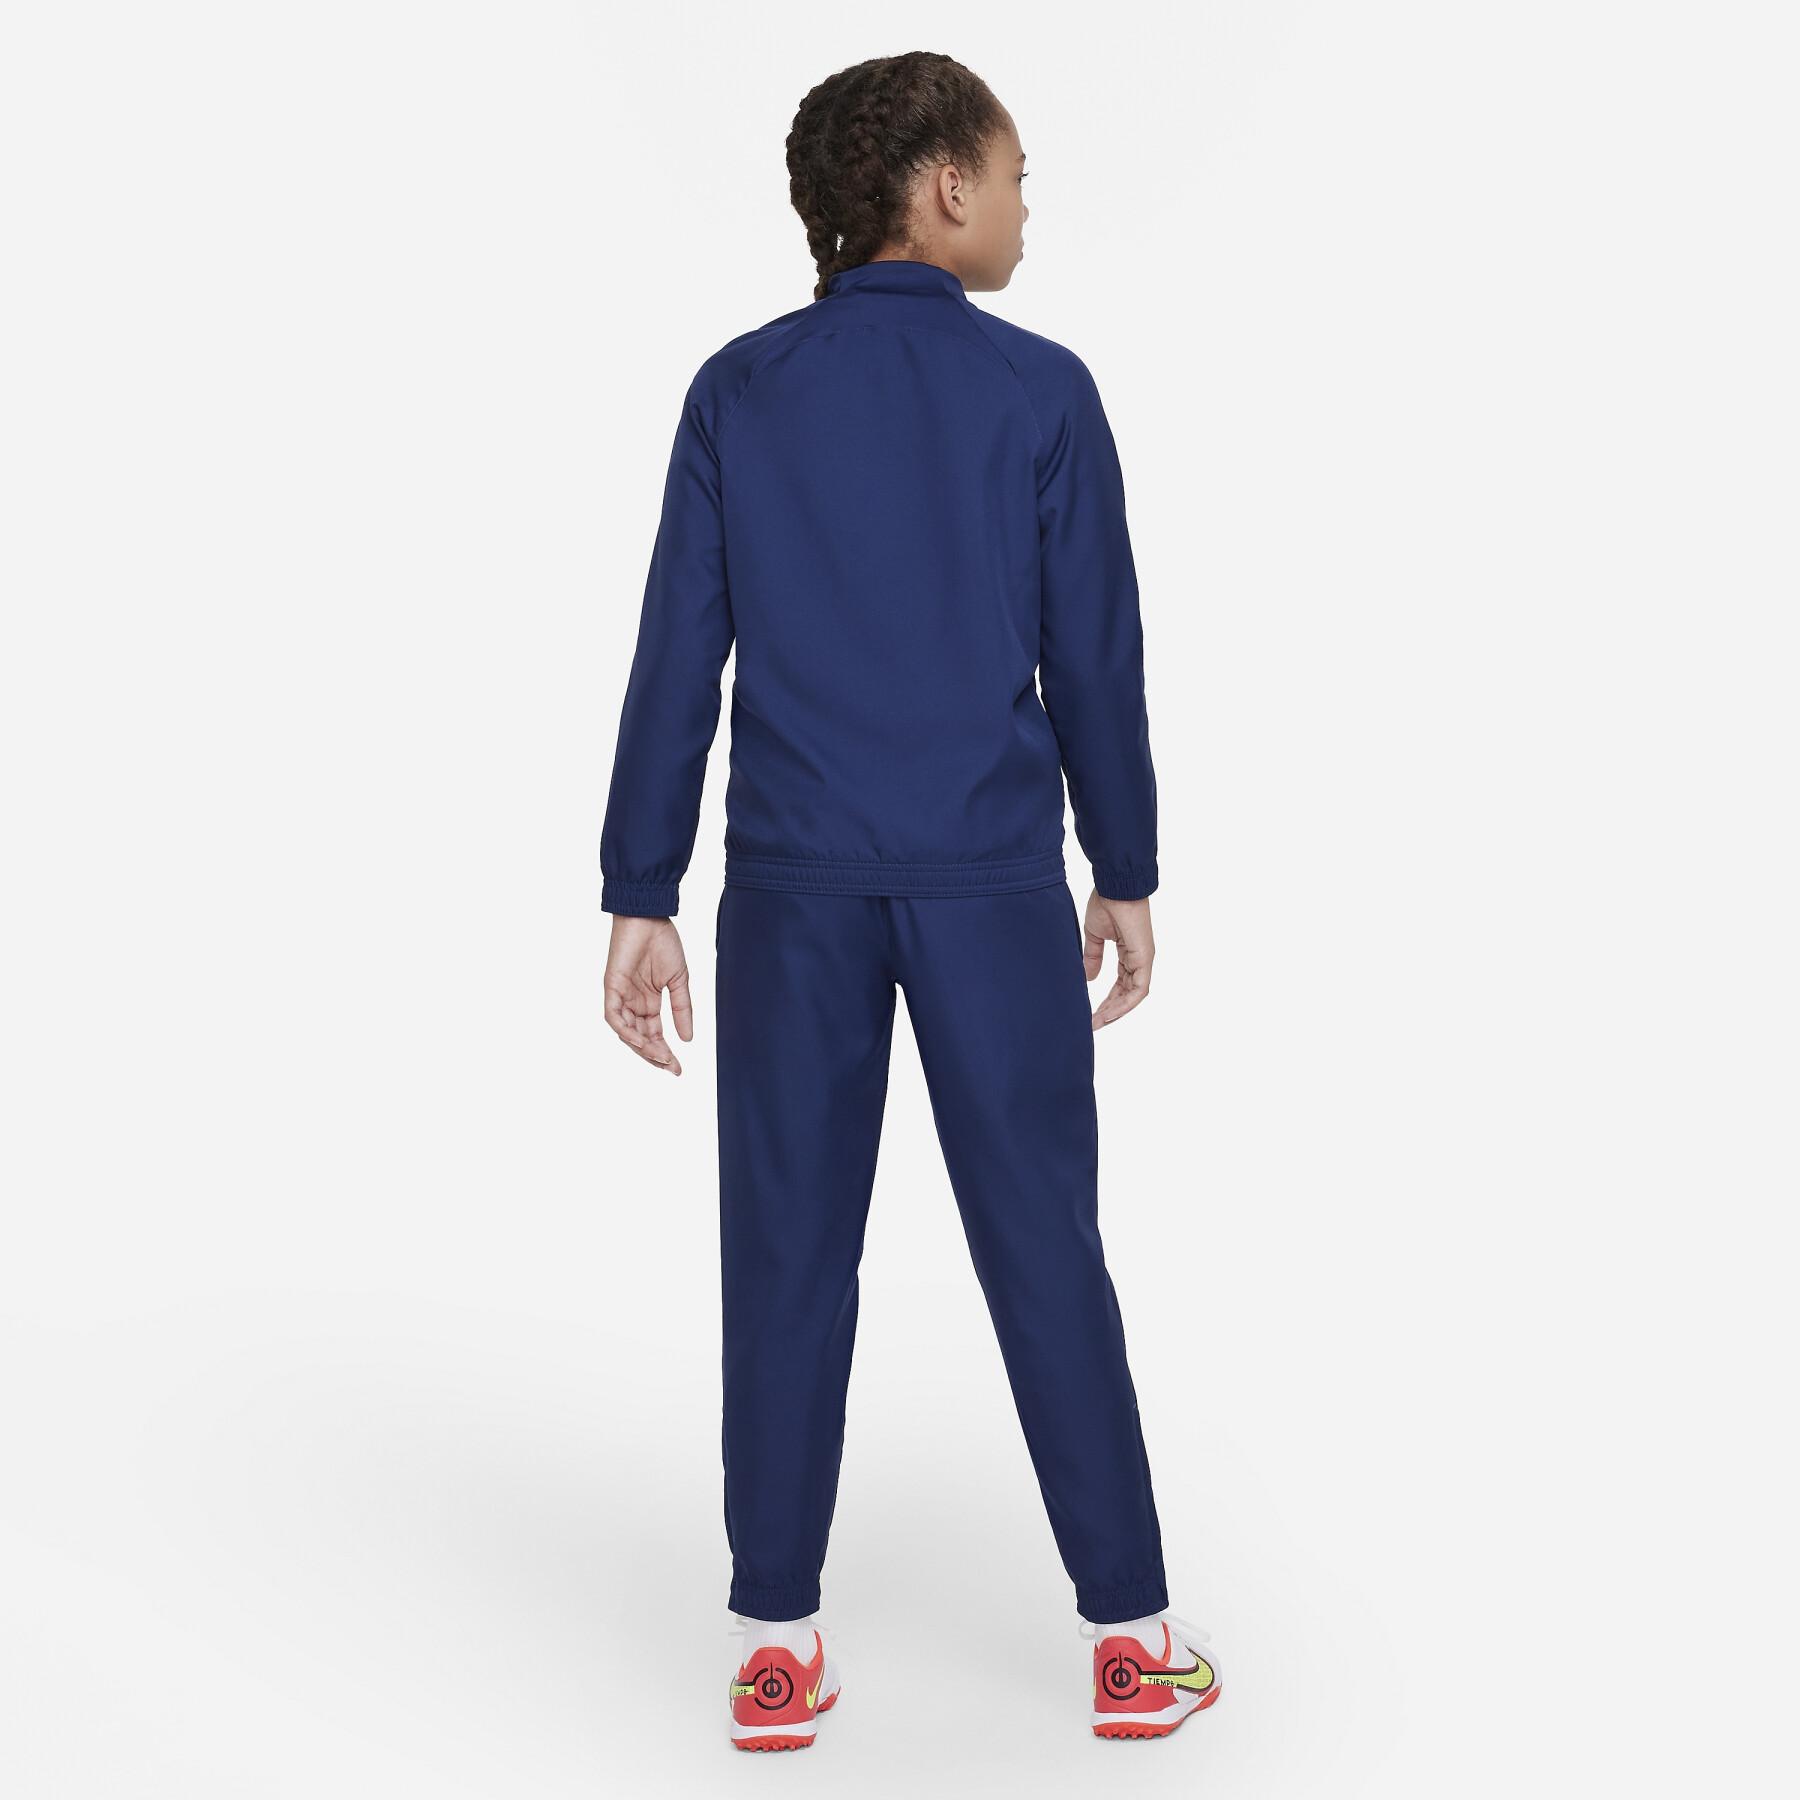 Tracksuit dri-fit child world cup 2022 France